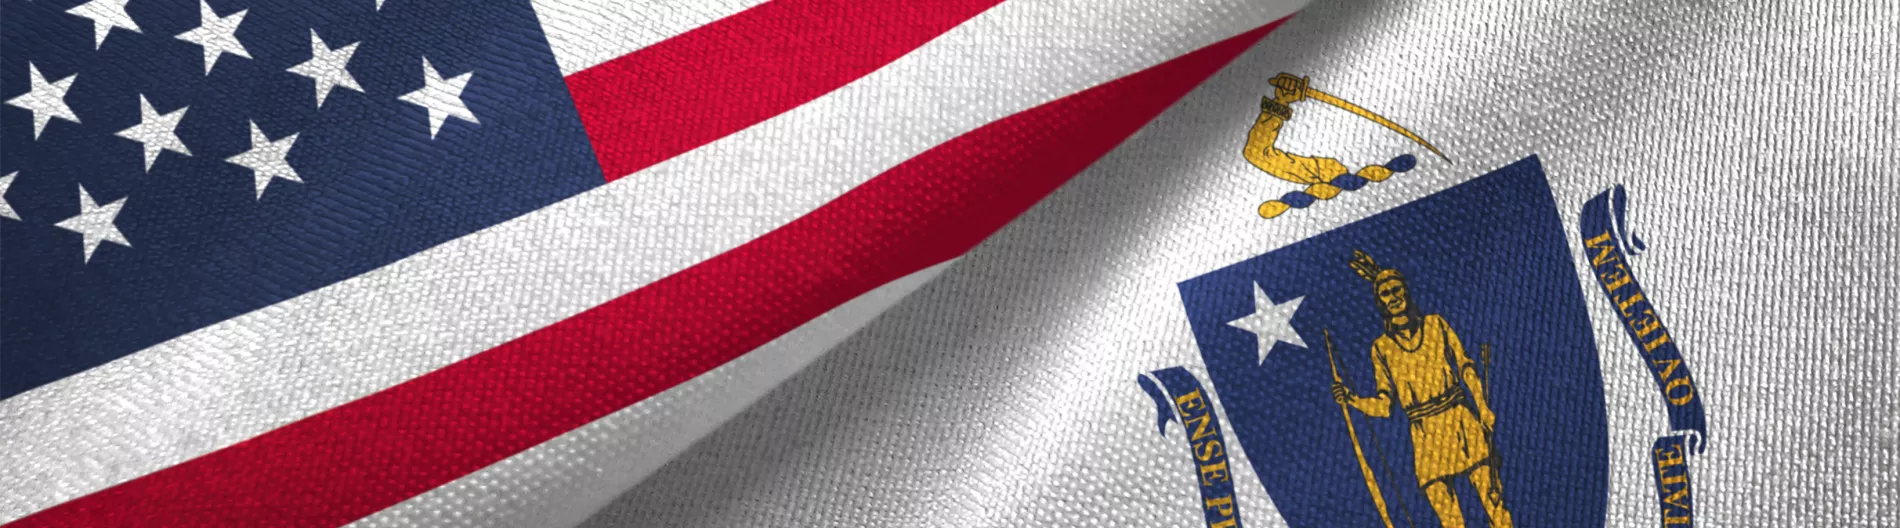 United States and Massachusetts flags